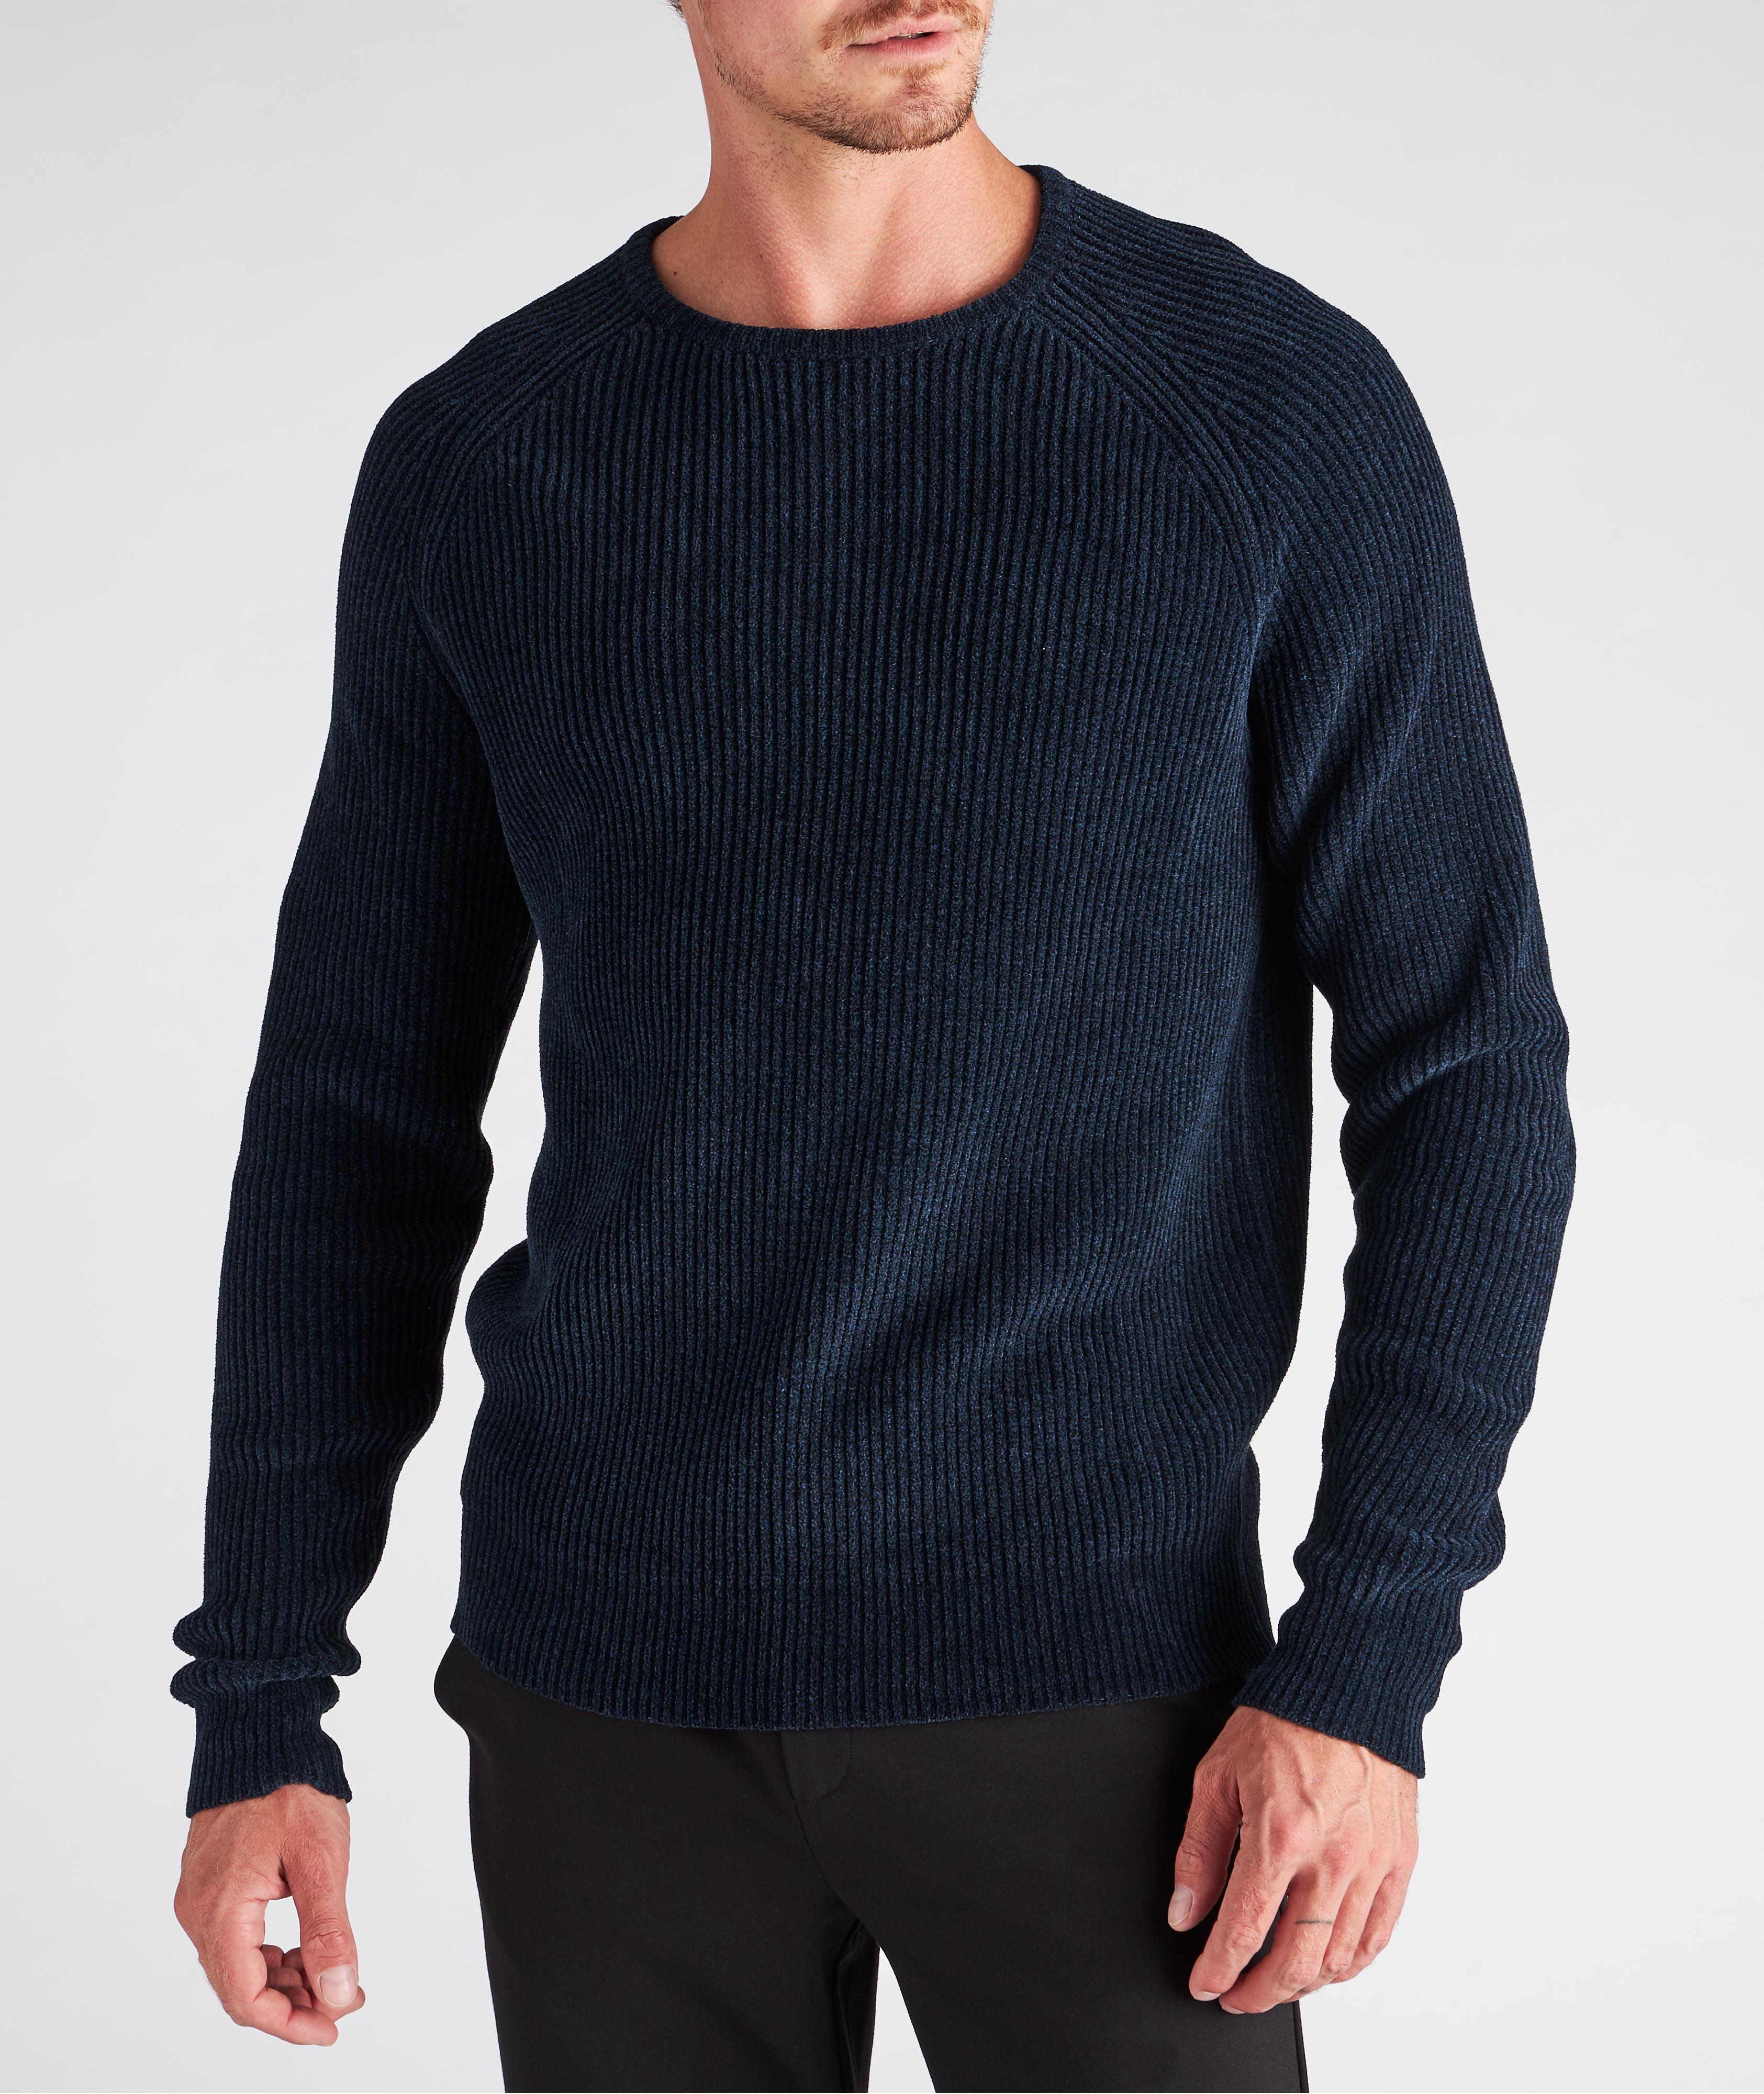 Patrick Assaraf Ribbed Knit Chenille Sweater | Sweaters & Knits | Final Cut